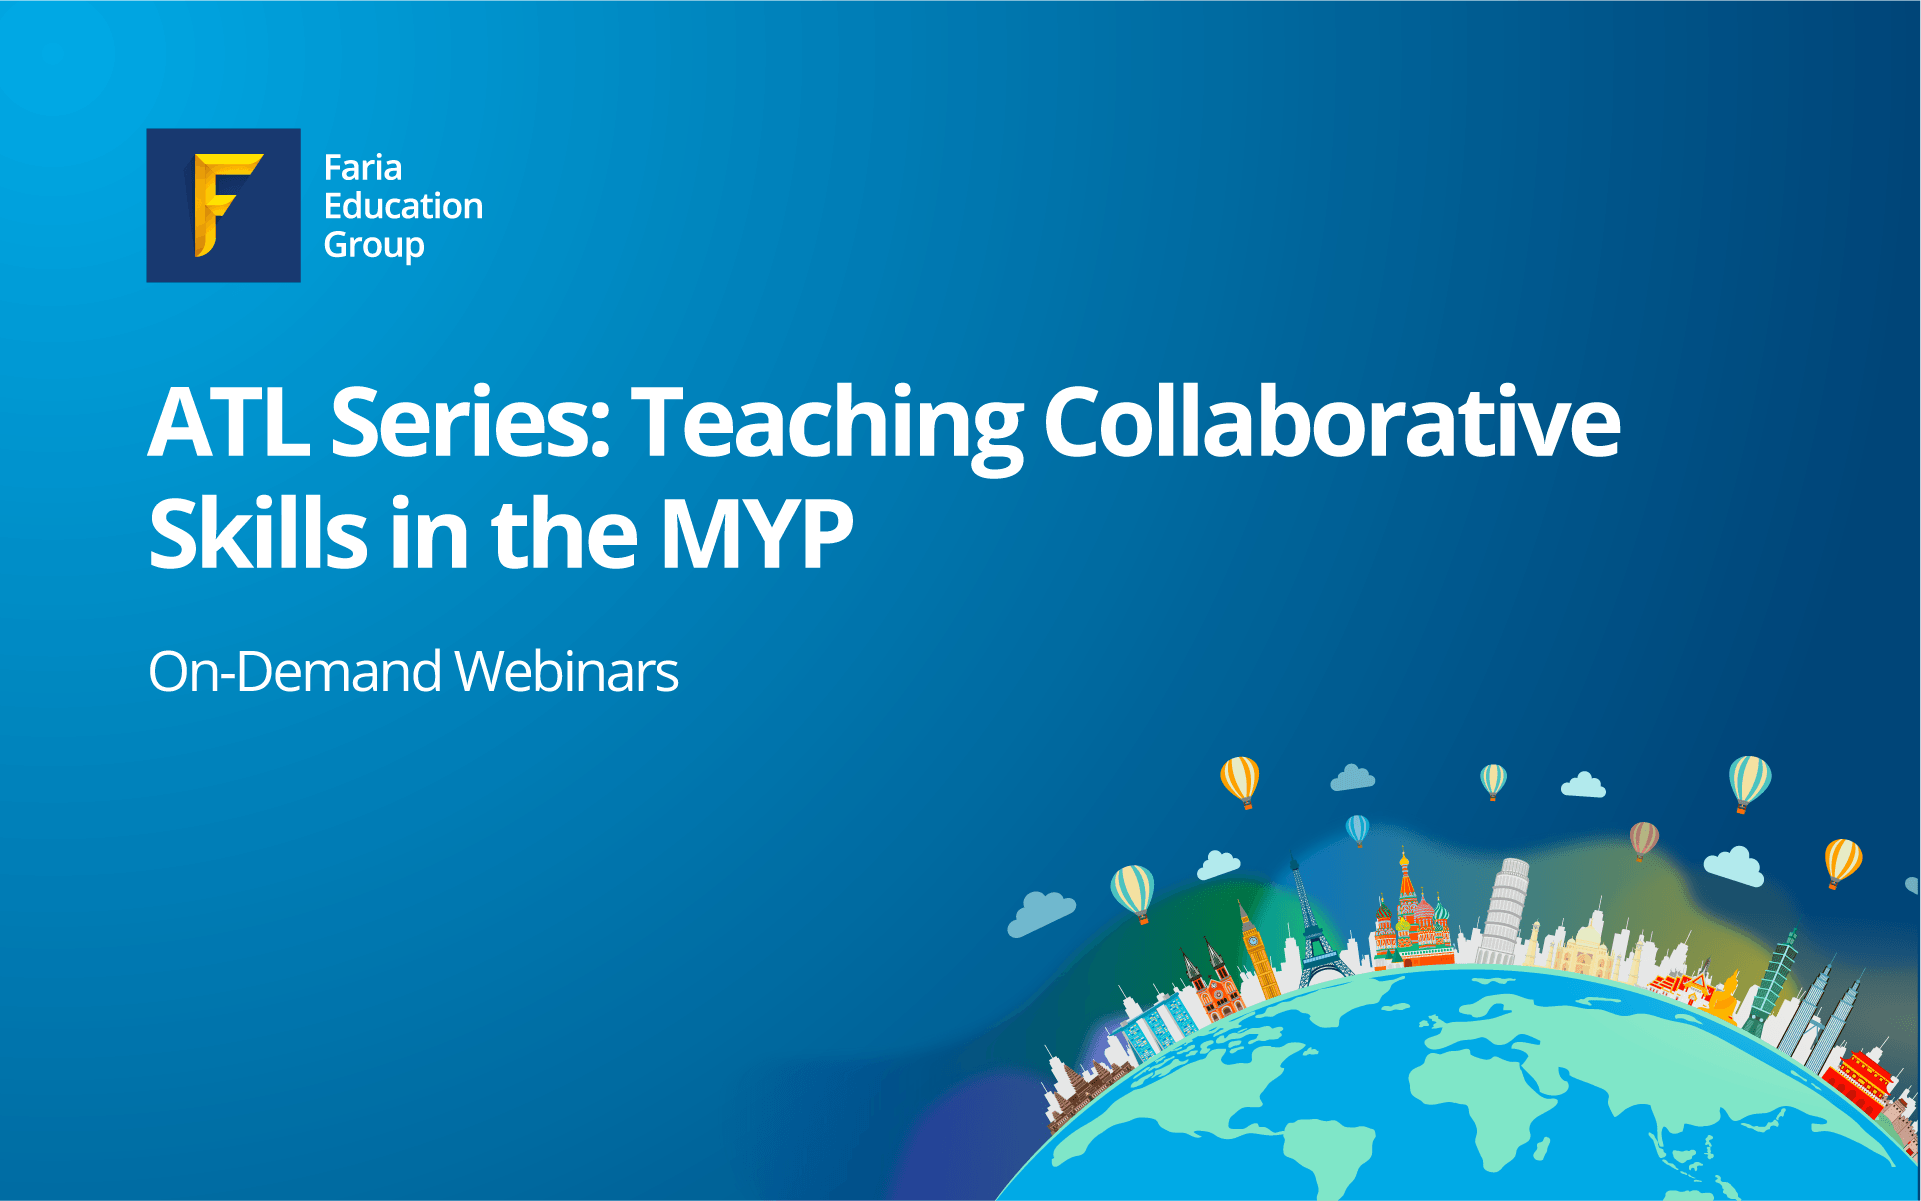 ATL Series: Teaching Collaborative skills in the MYP